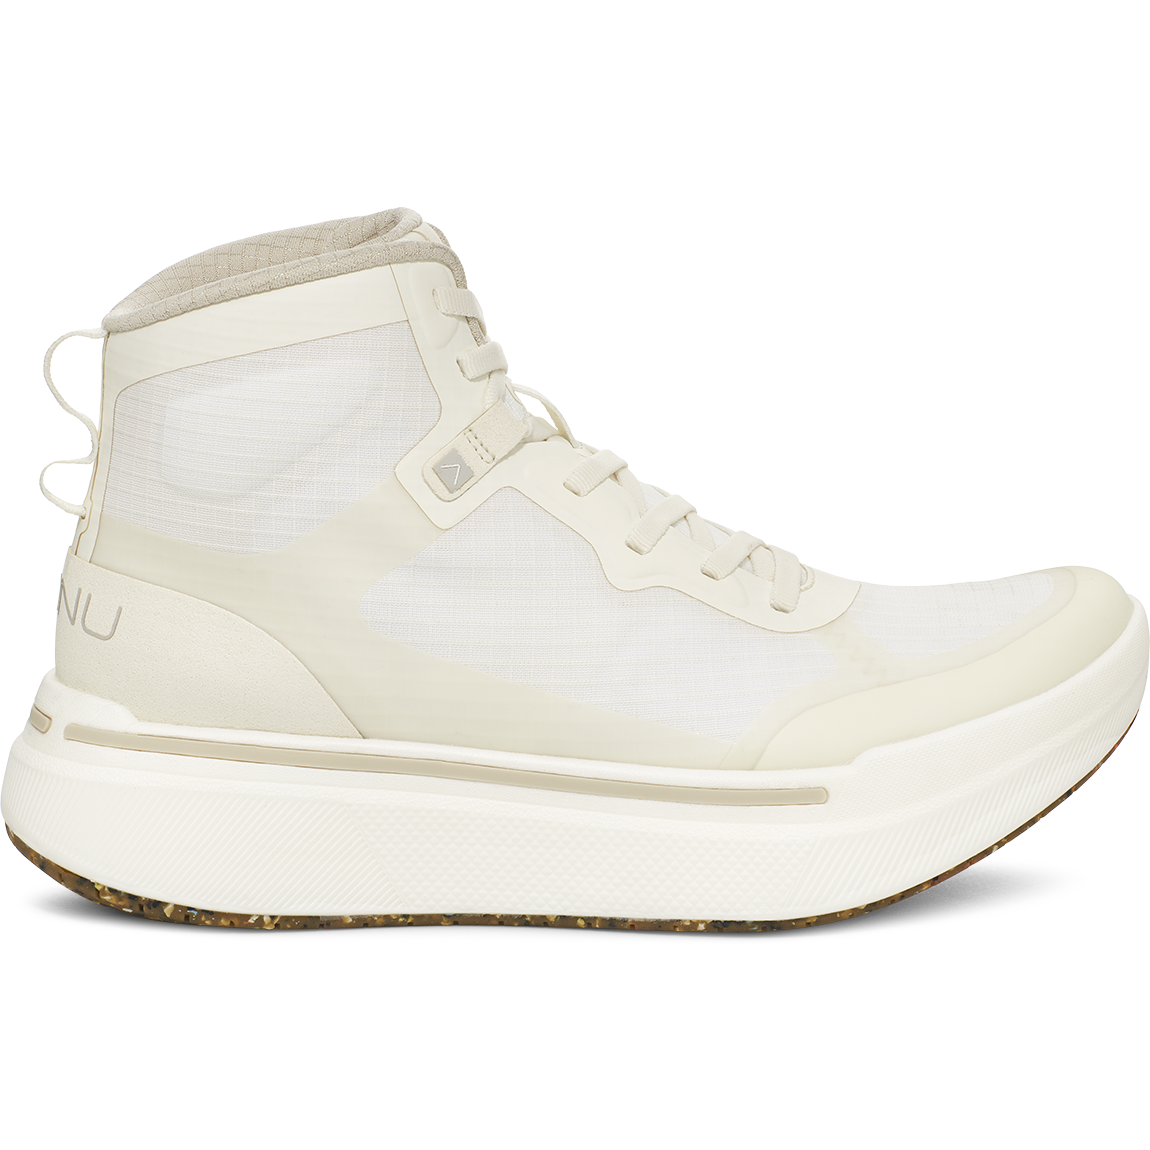 AHNU M Sneakers W Sequence High, White